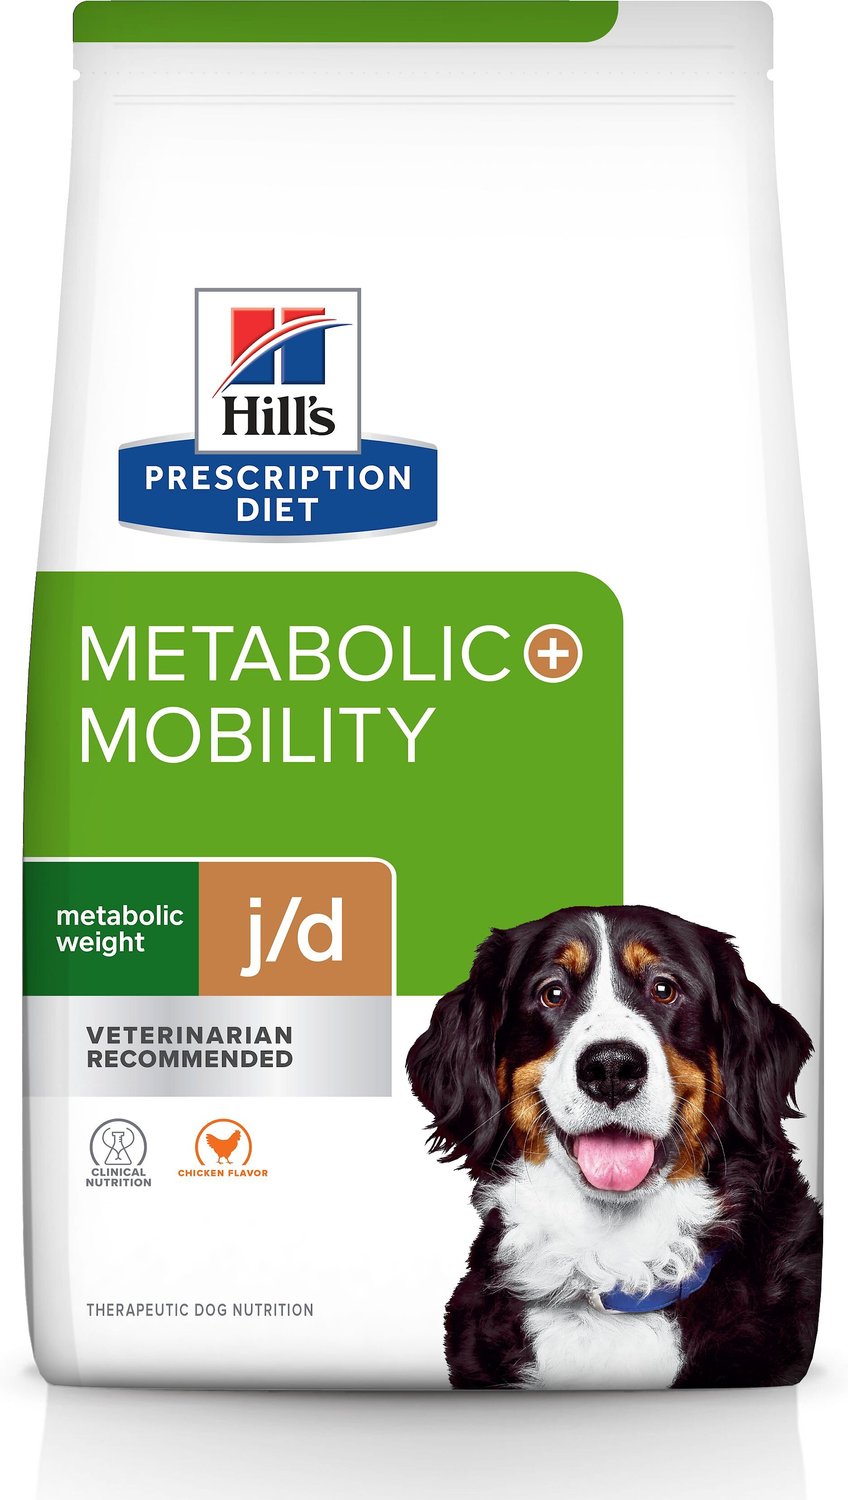 cheapest hills metabolic dog food